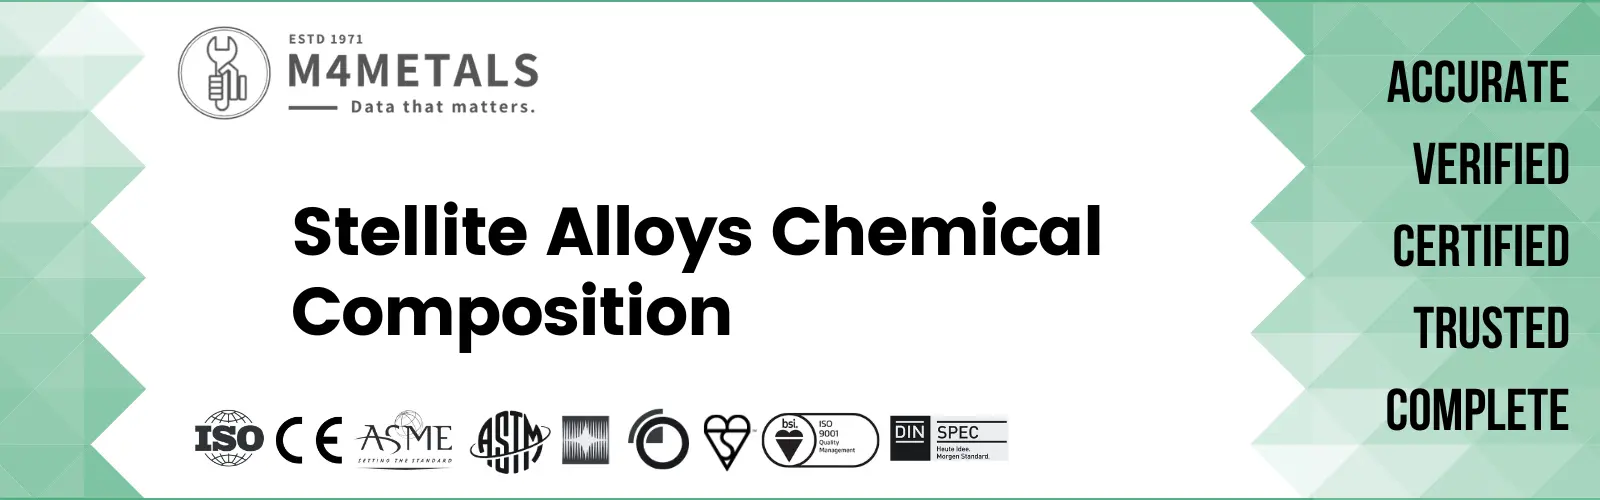 Stellite Alloy Chemical Composition